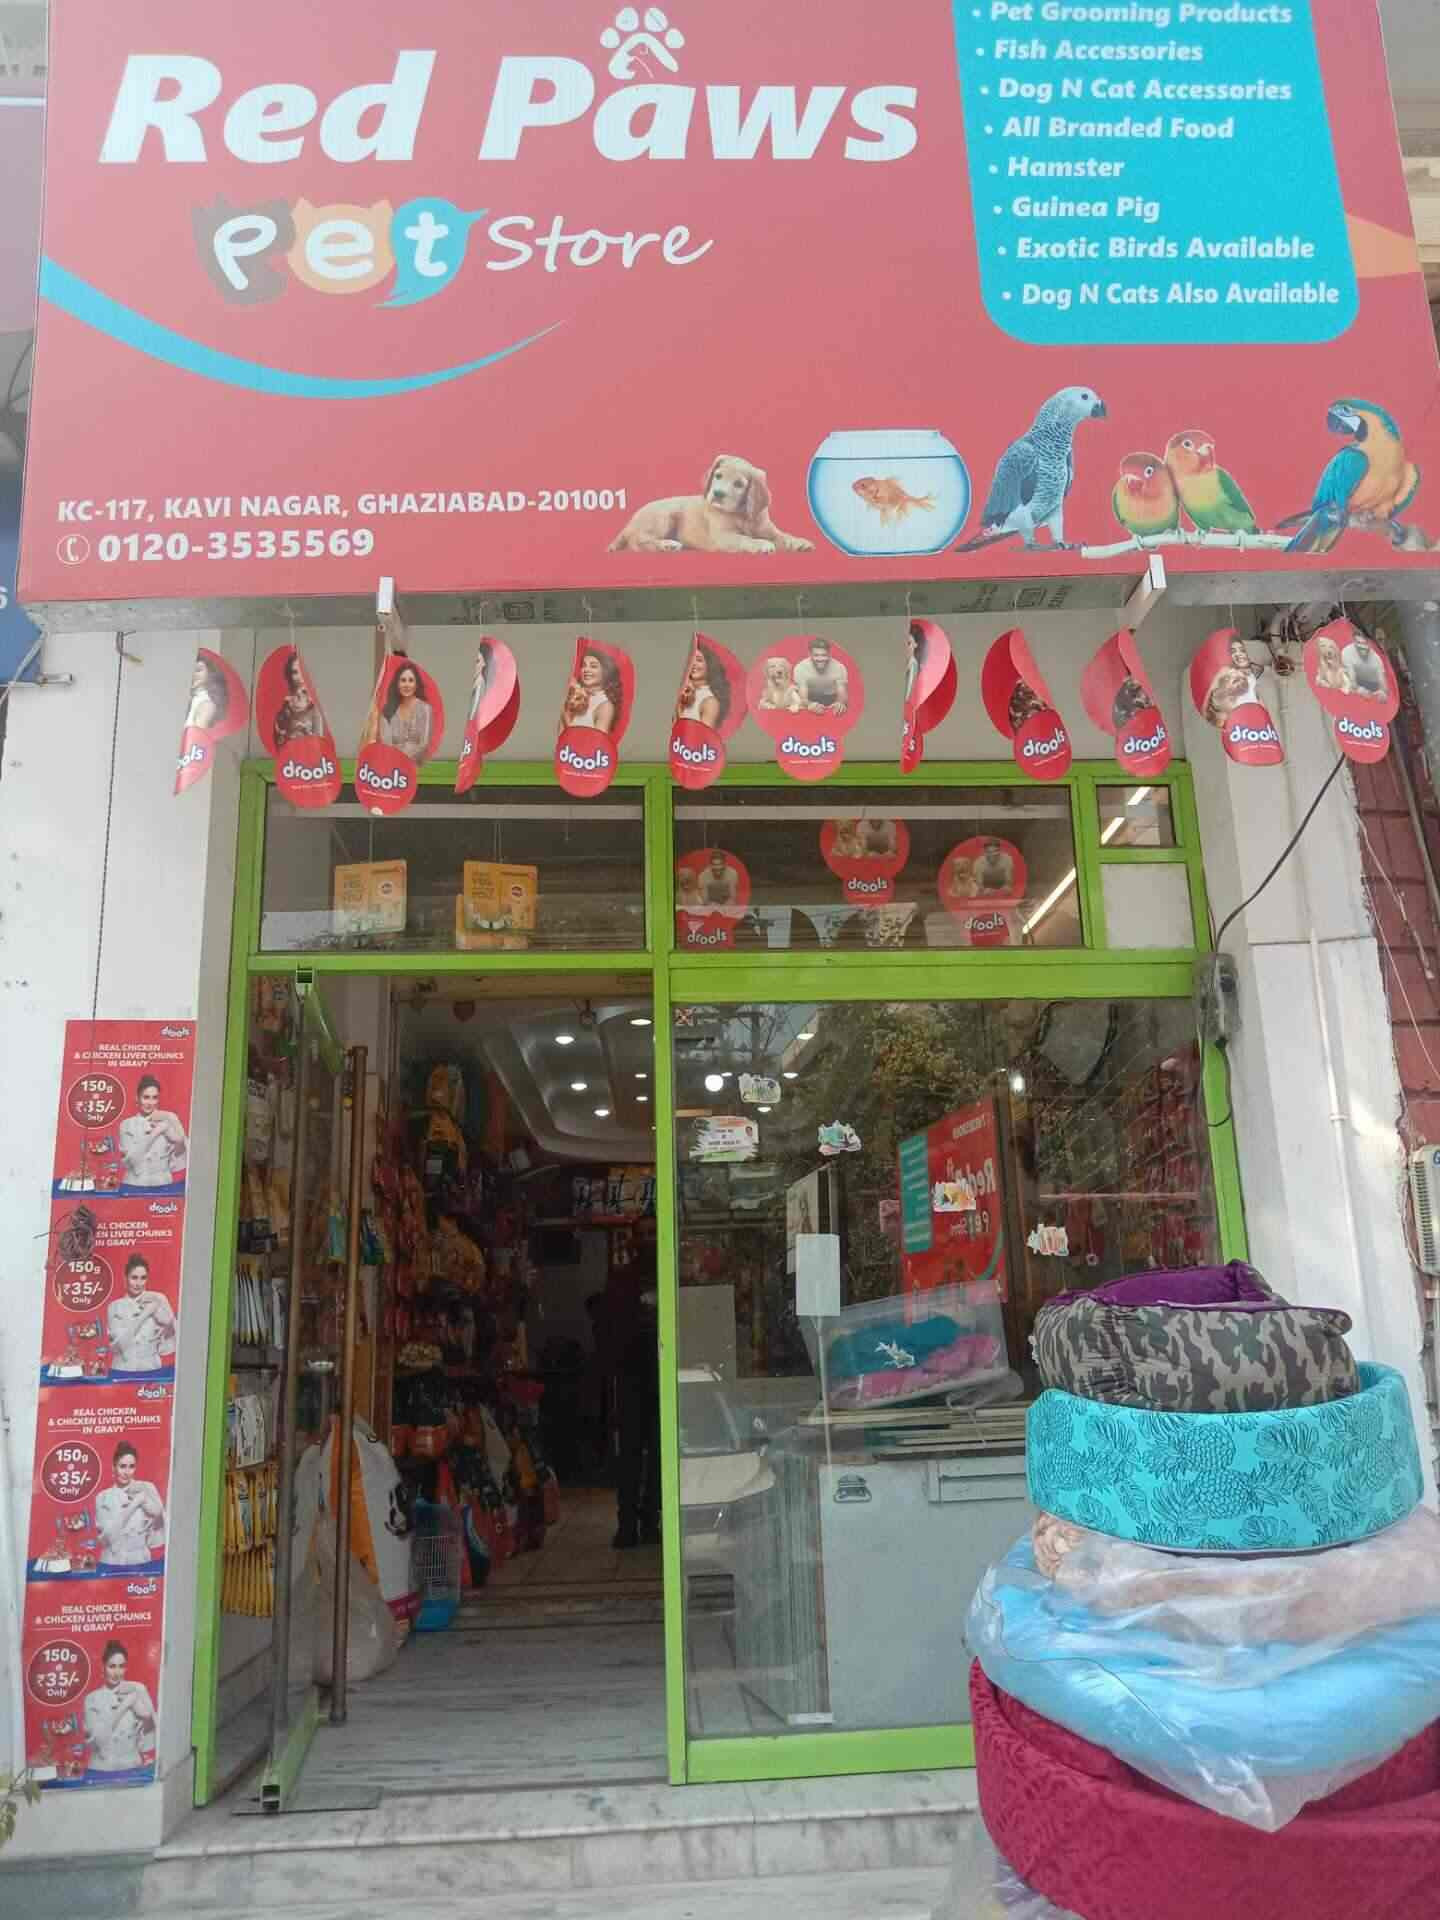 Red Paws Pet Store